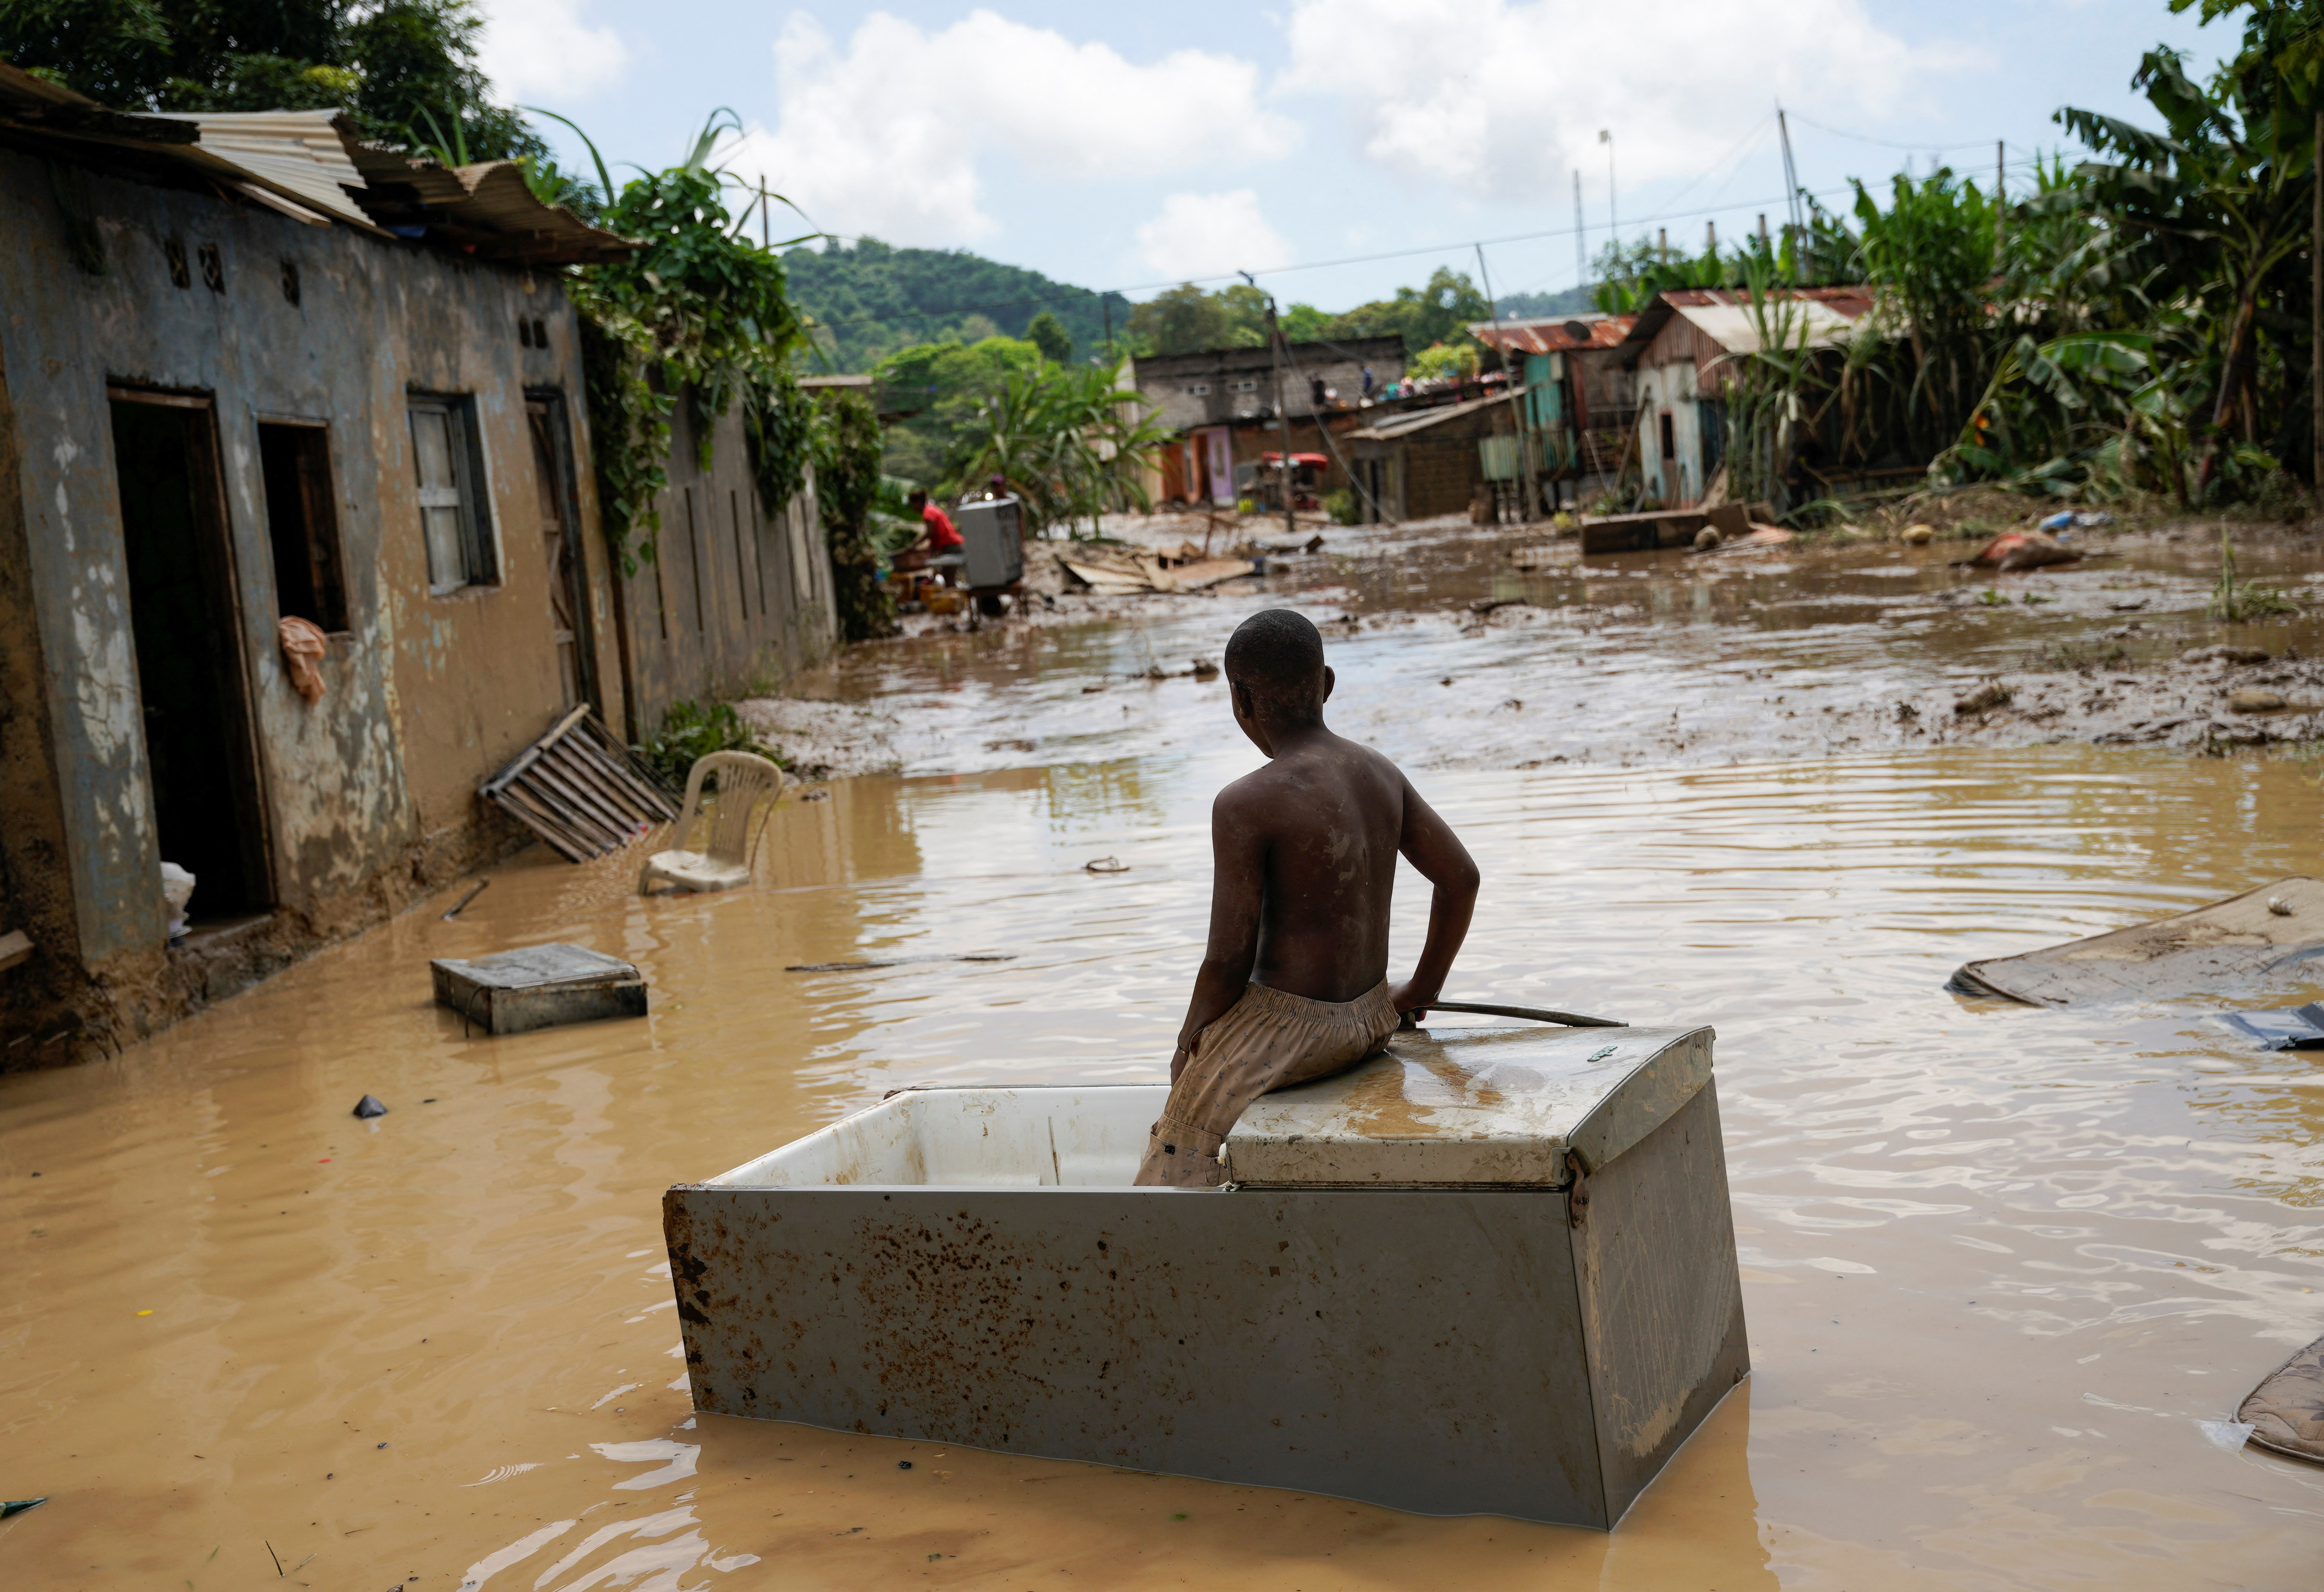 A boy sits on a refrigerator surrounded by floodwater.